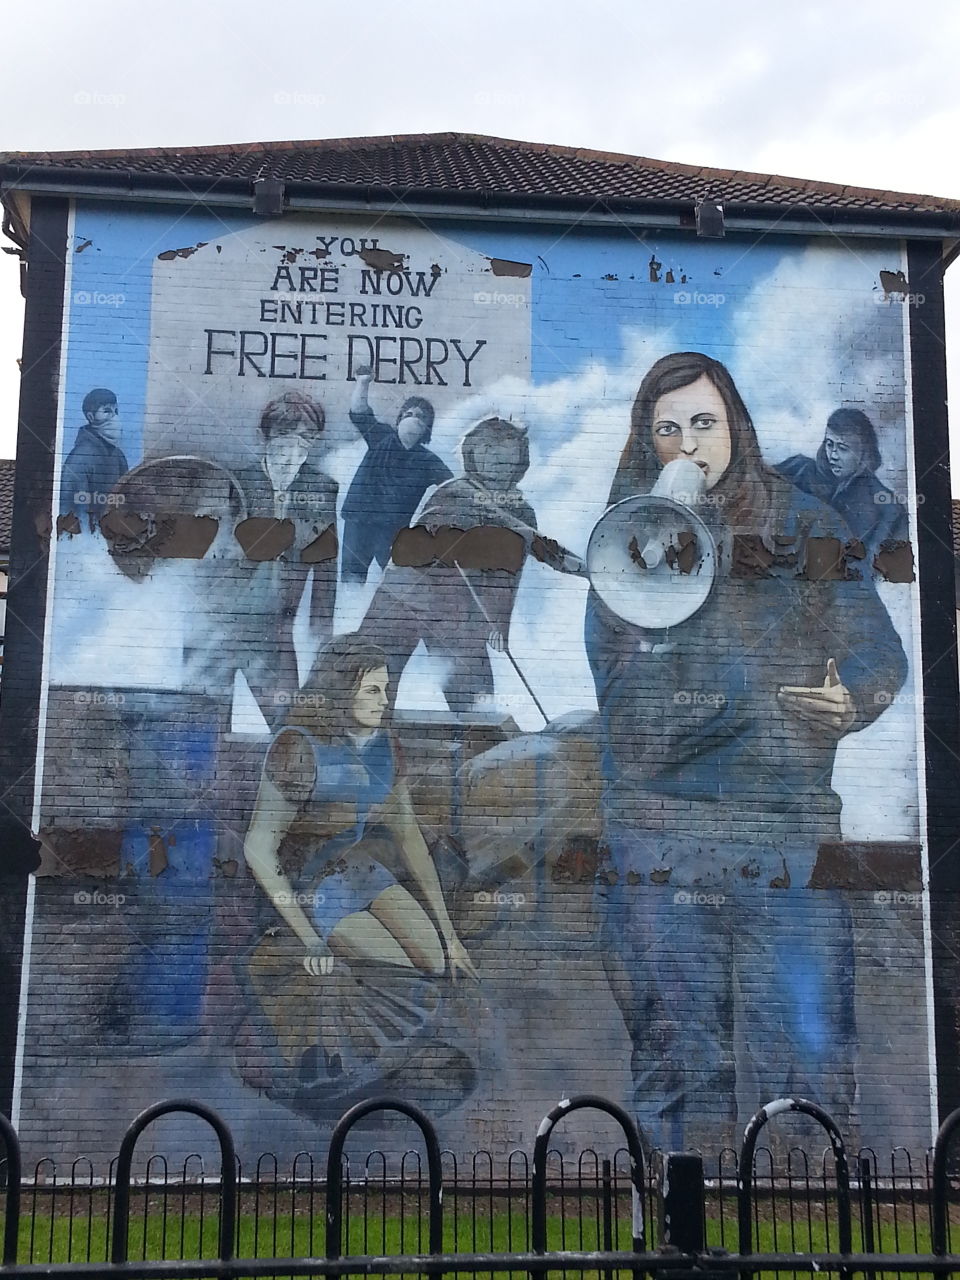 Entering free derry mural